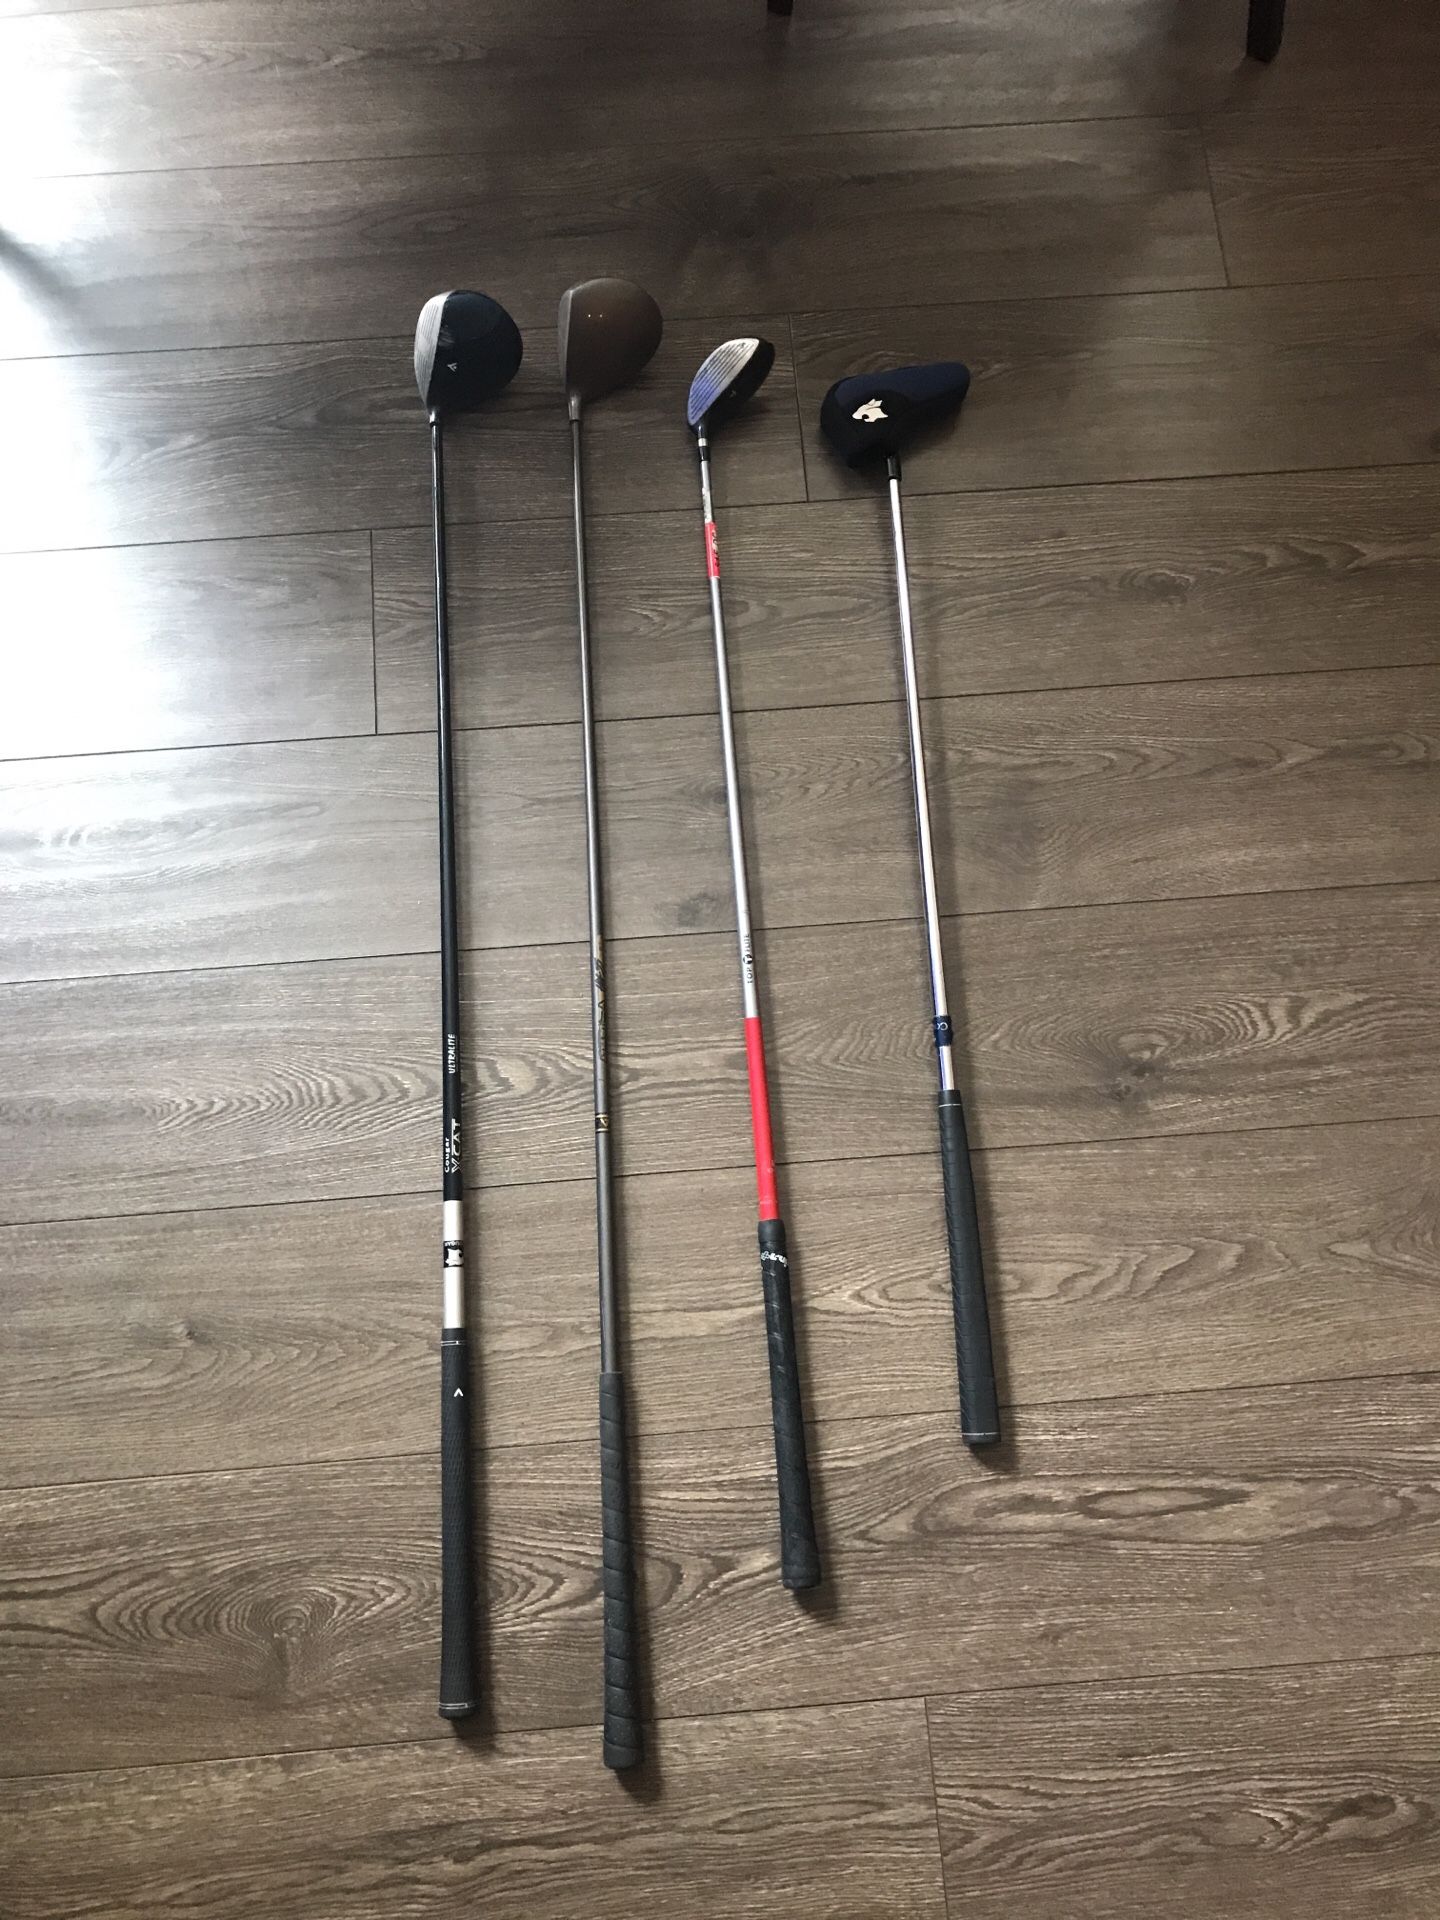 Assortment of used golf clubs (DR, 3w, 5w, Putter)